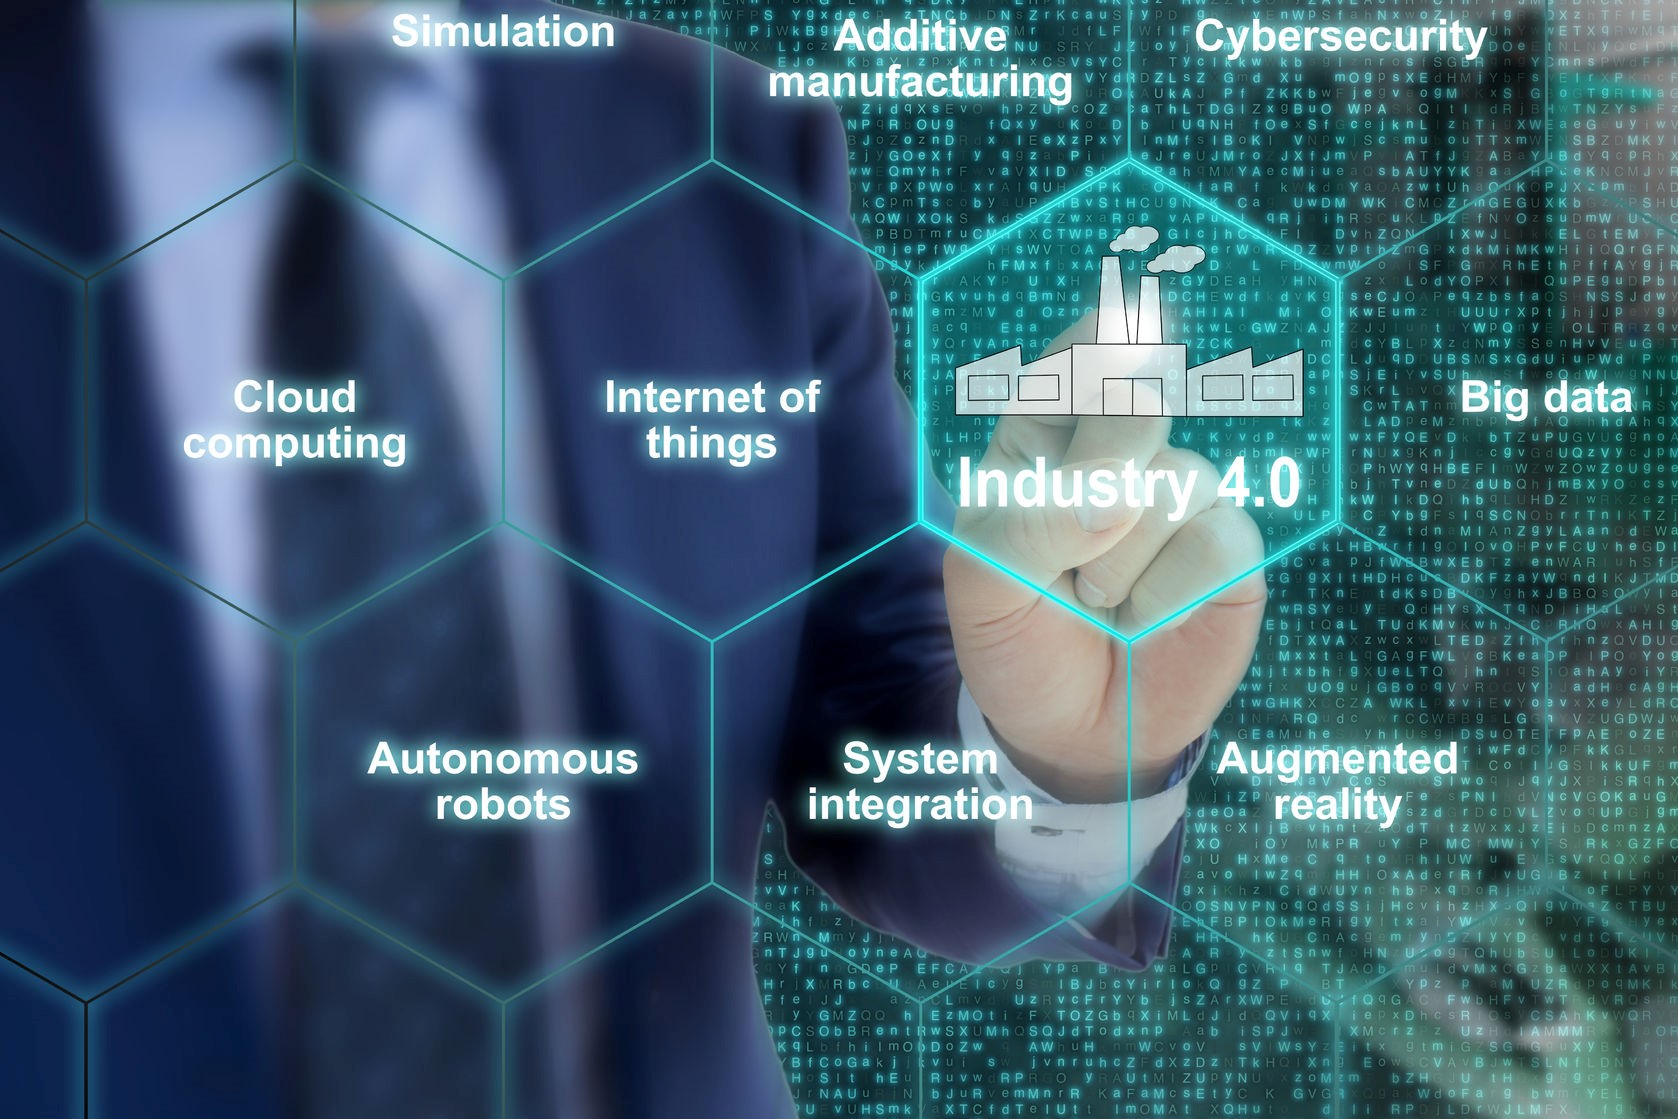 How Critical Infrastructures are Affected by Industry 4.0